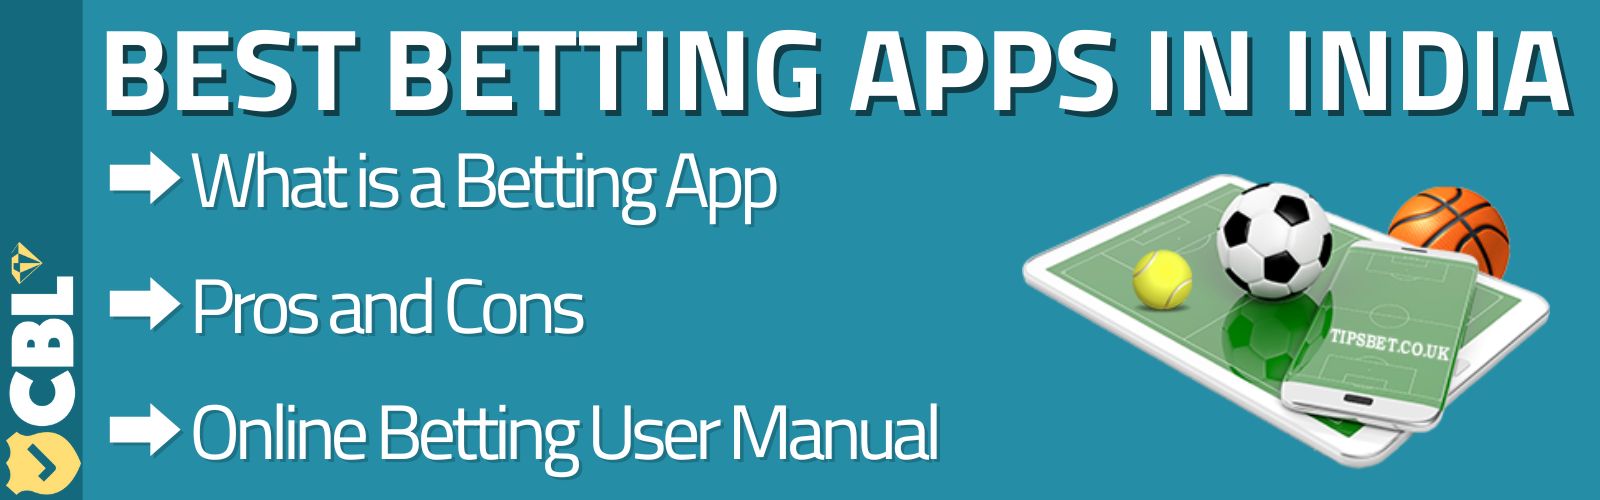 22 Tips To Start Building A Best Online Cricket Betting Apps In India You Always Wanted